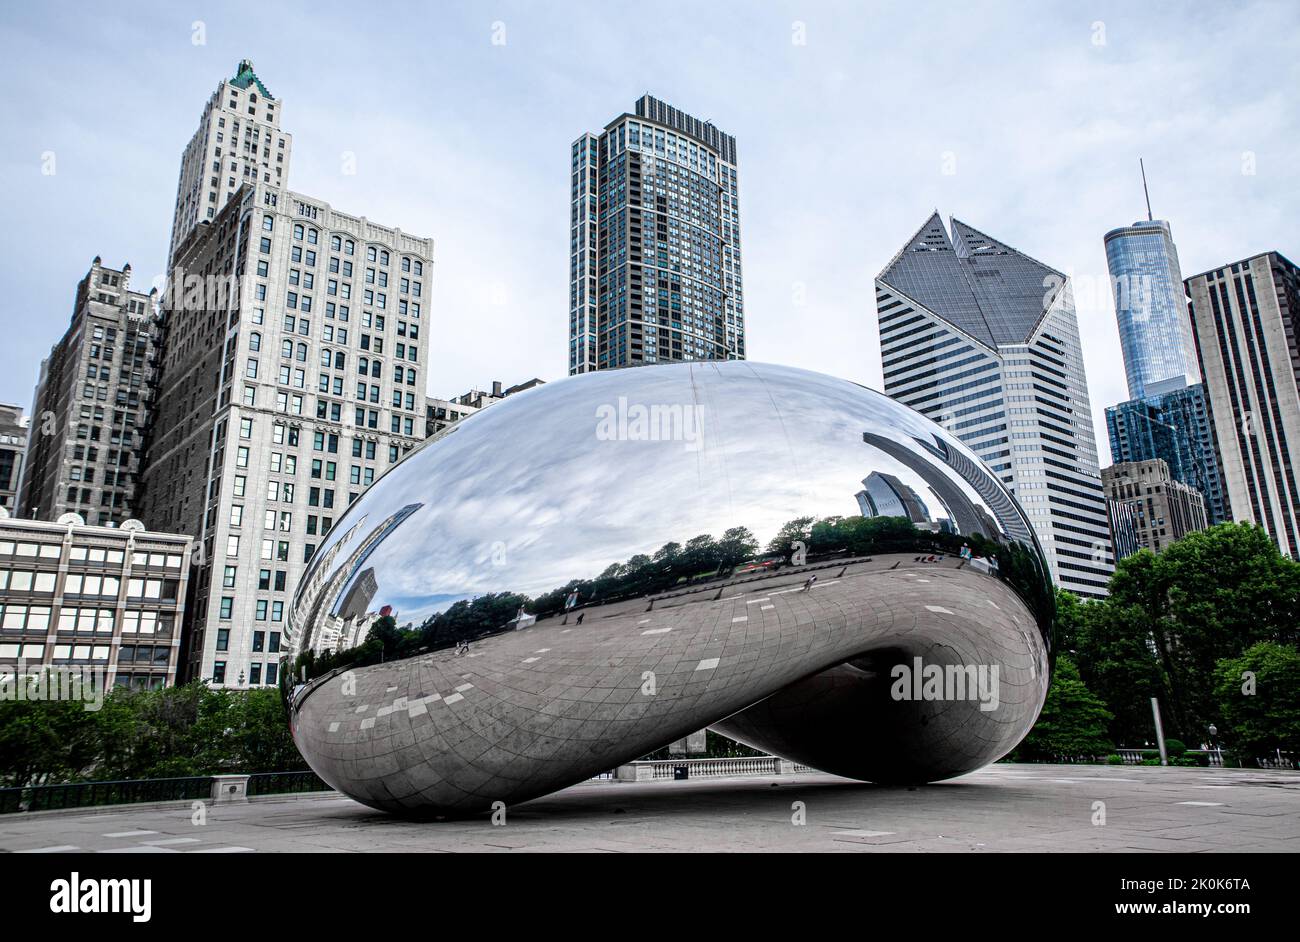 The Bean (Cloud Gate) inside Chicago Millennium park, office buildings showing in the background. Stock Photo